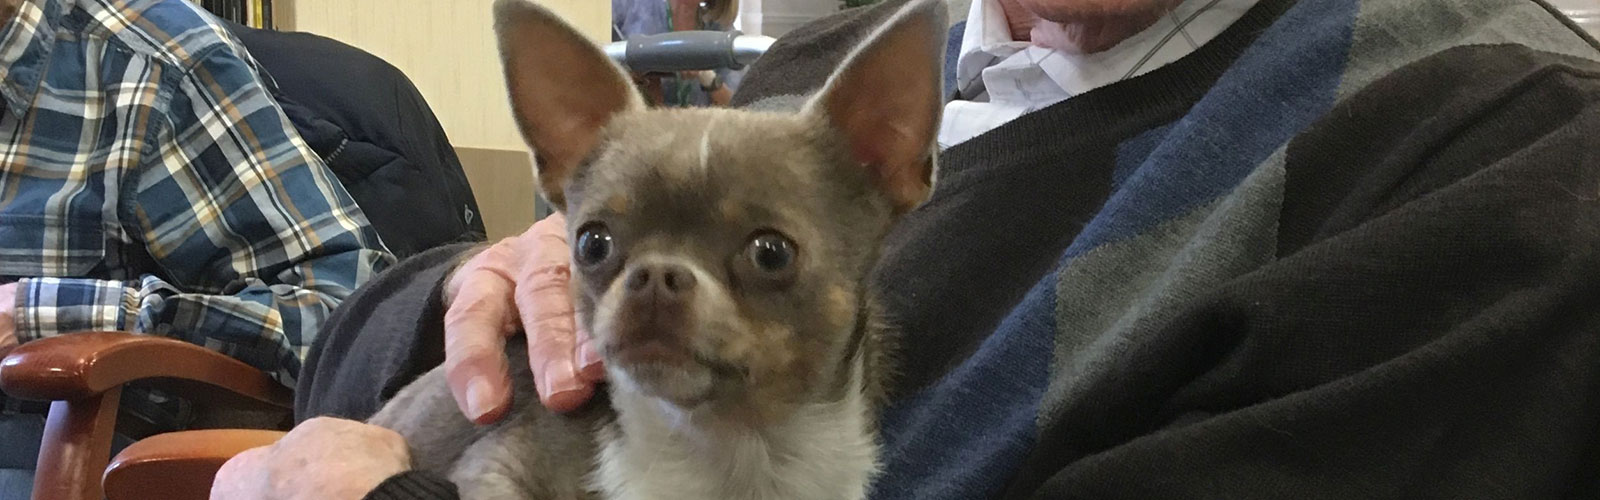 Dave the chihuahua